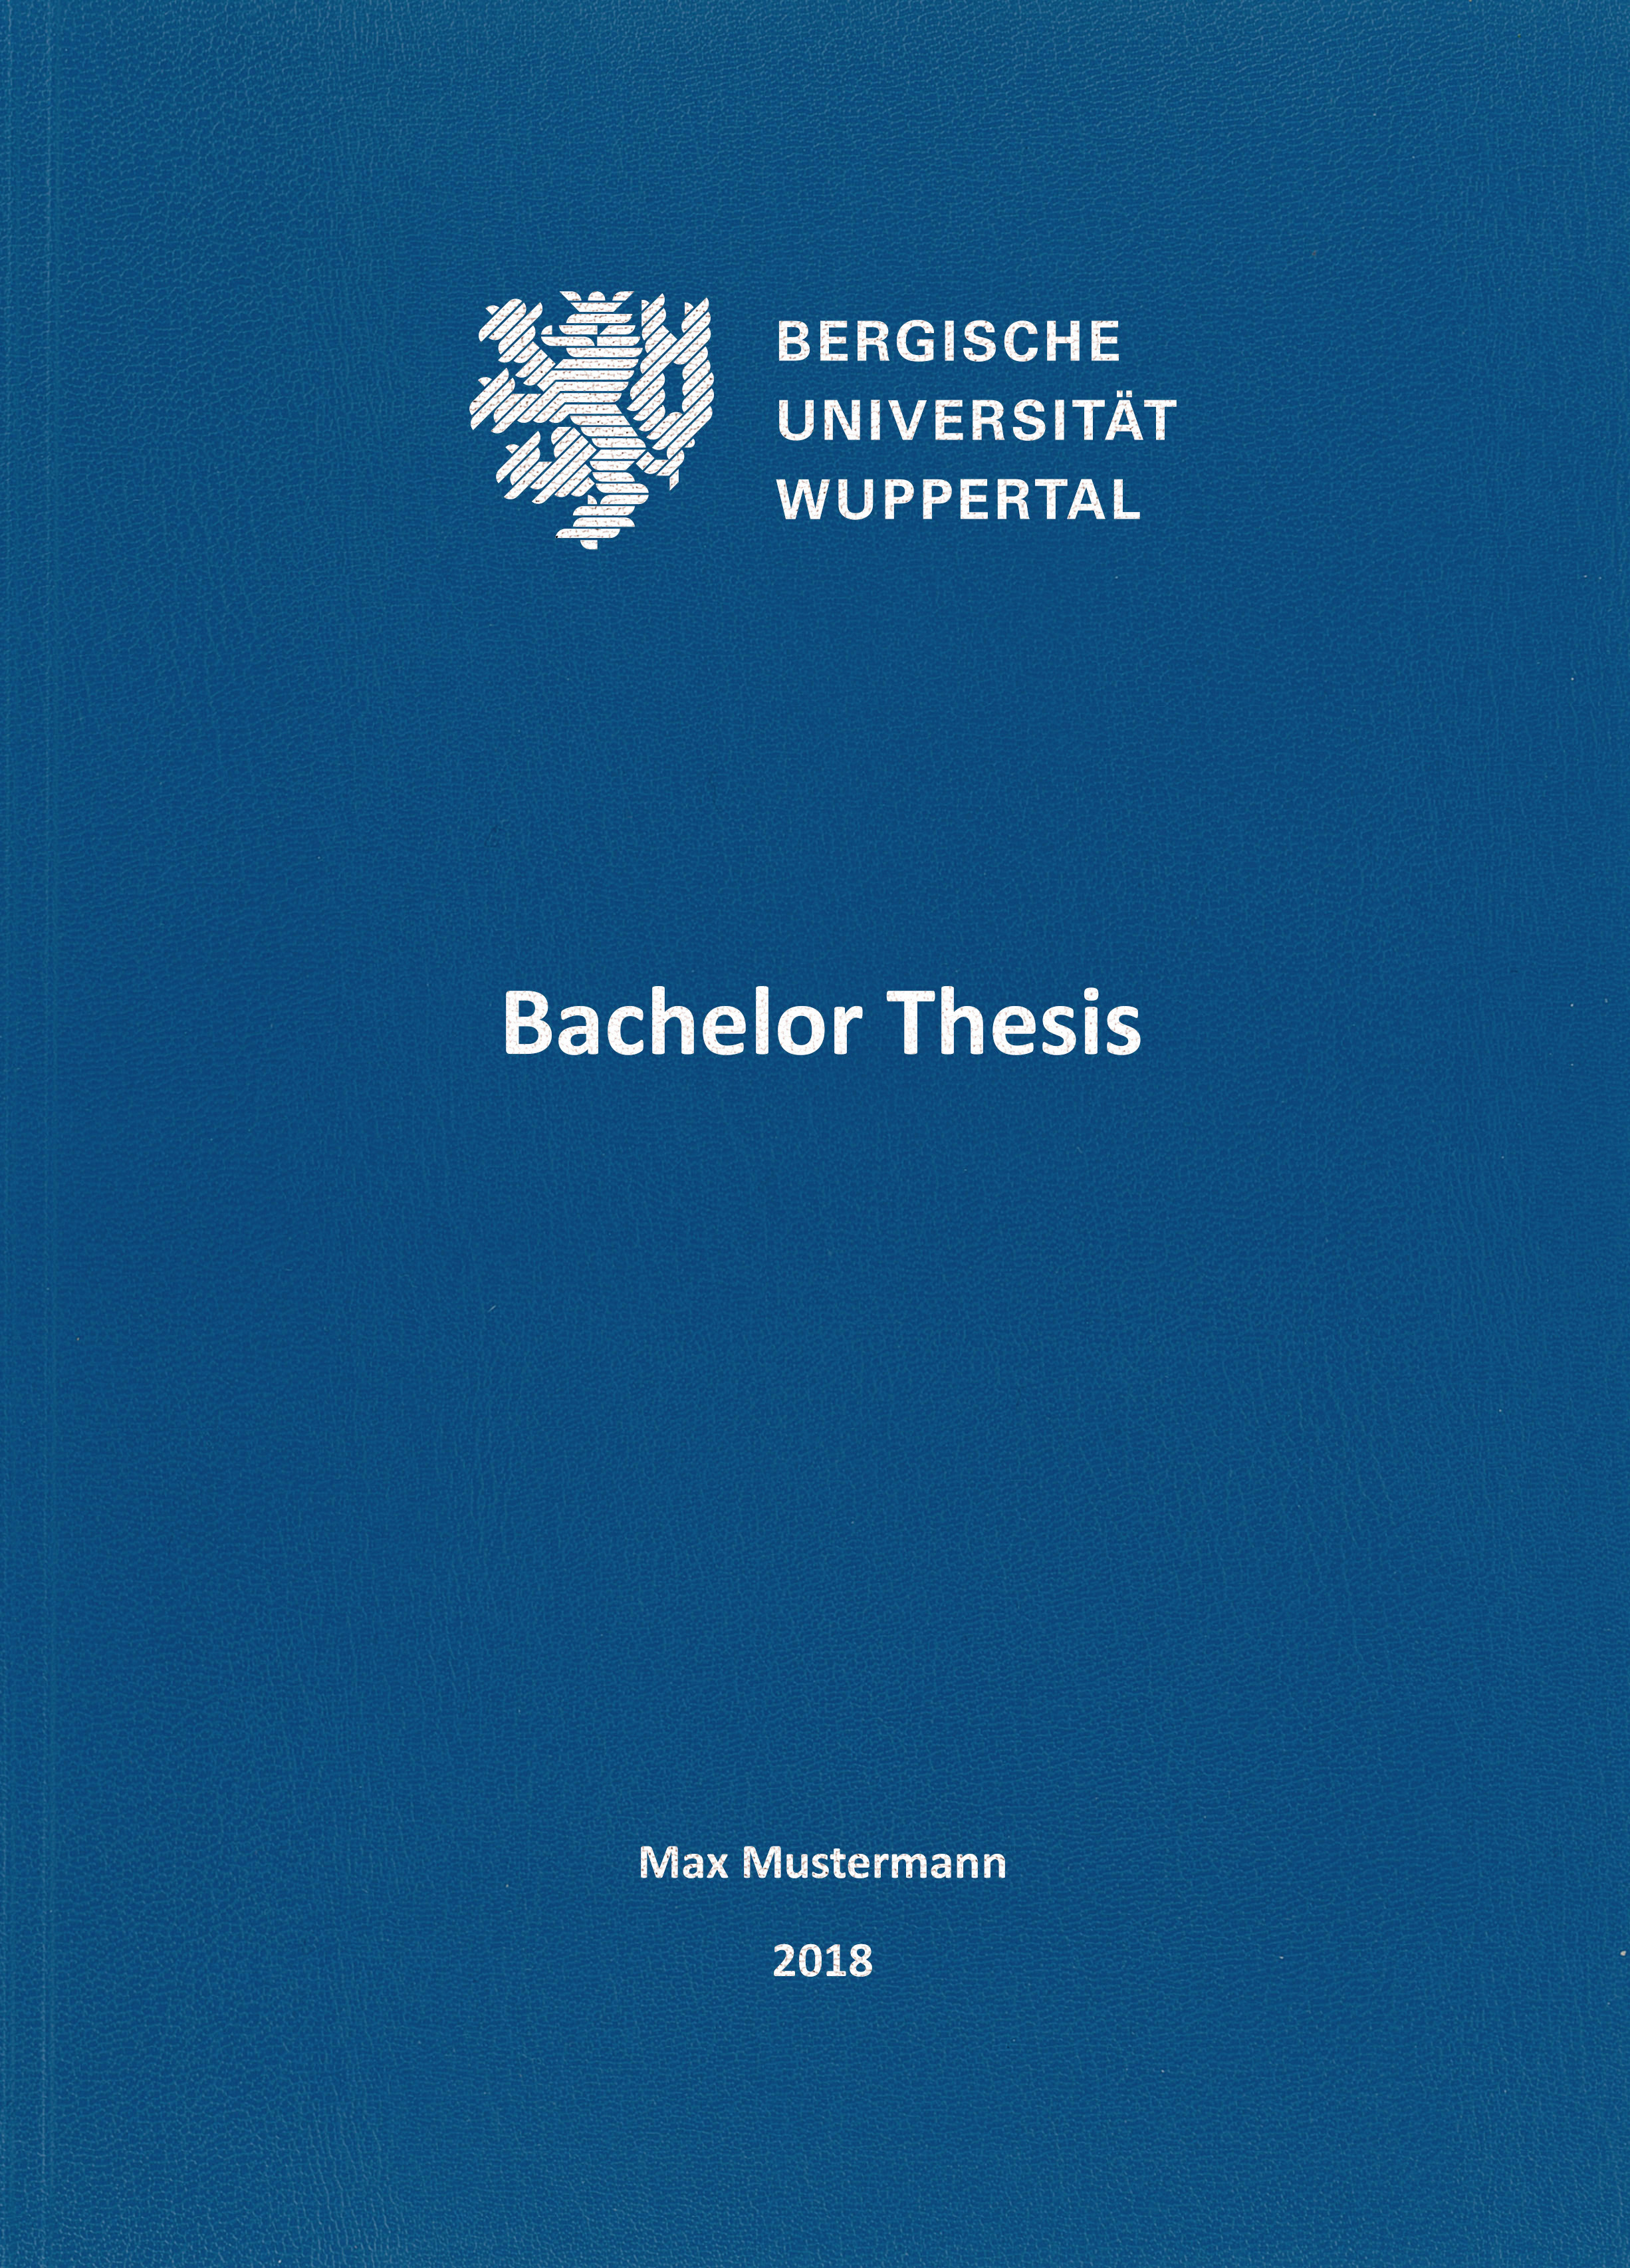 uni wuppertal thesis anmeldung